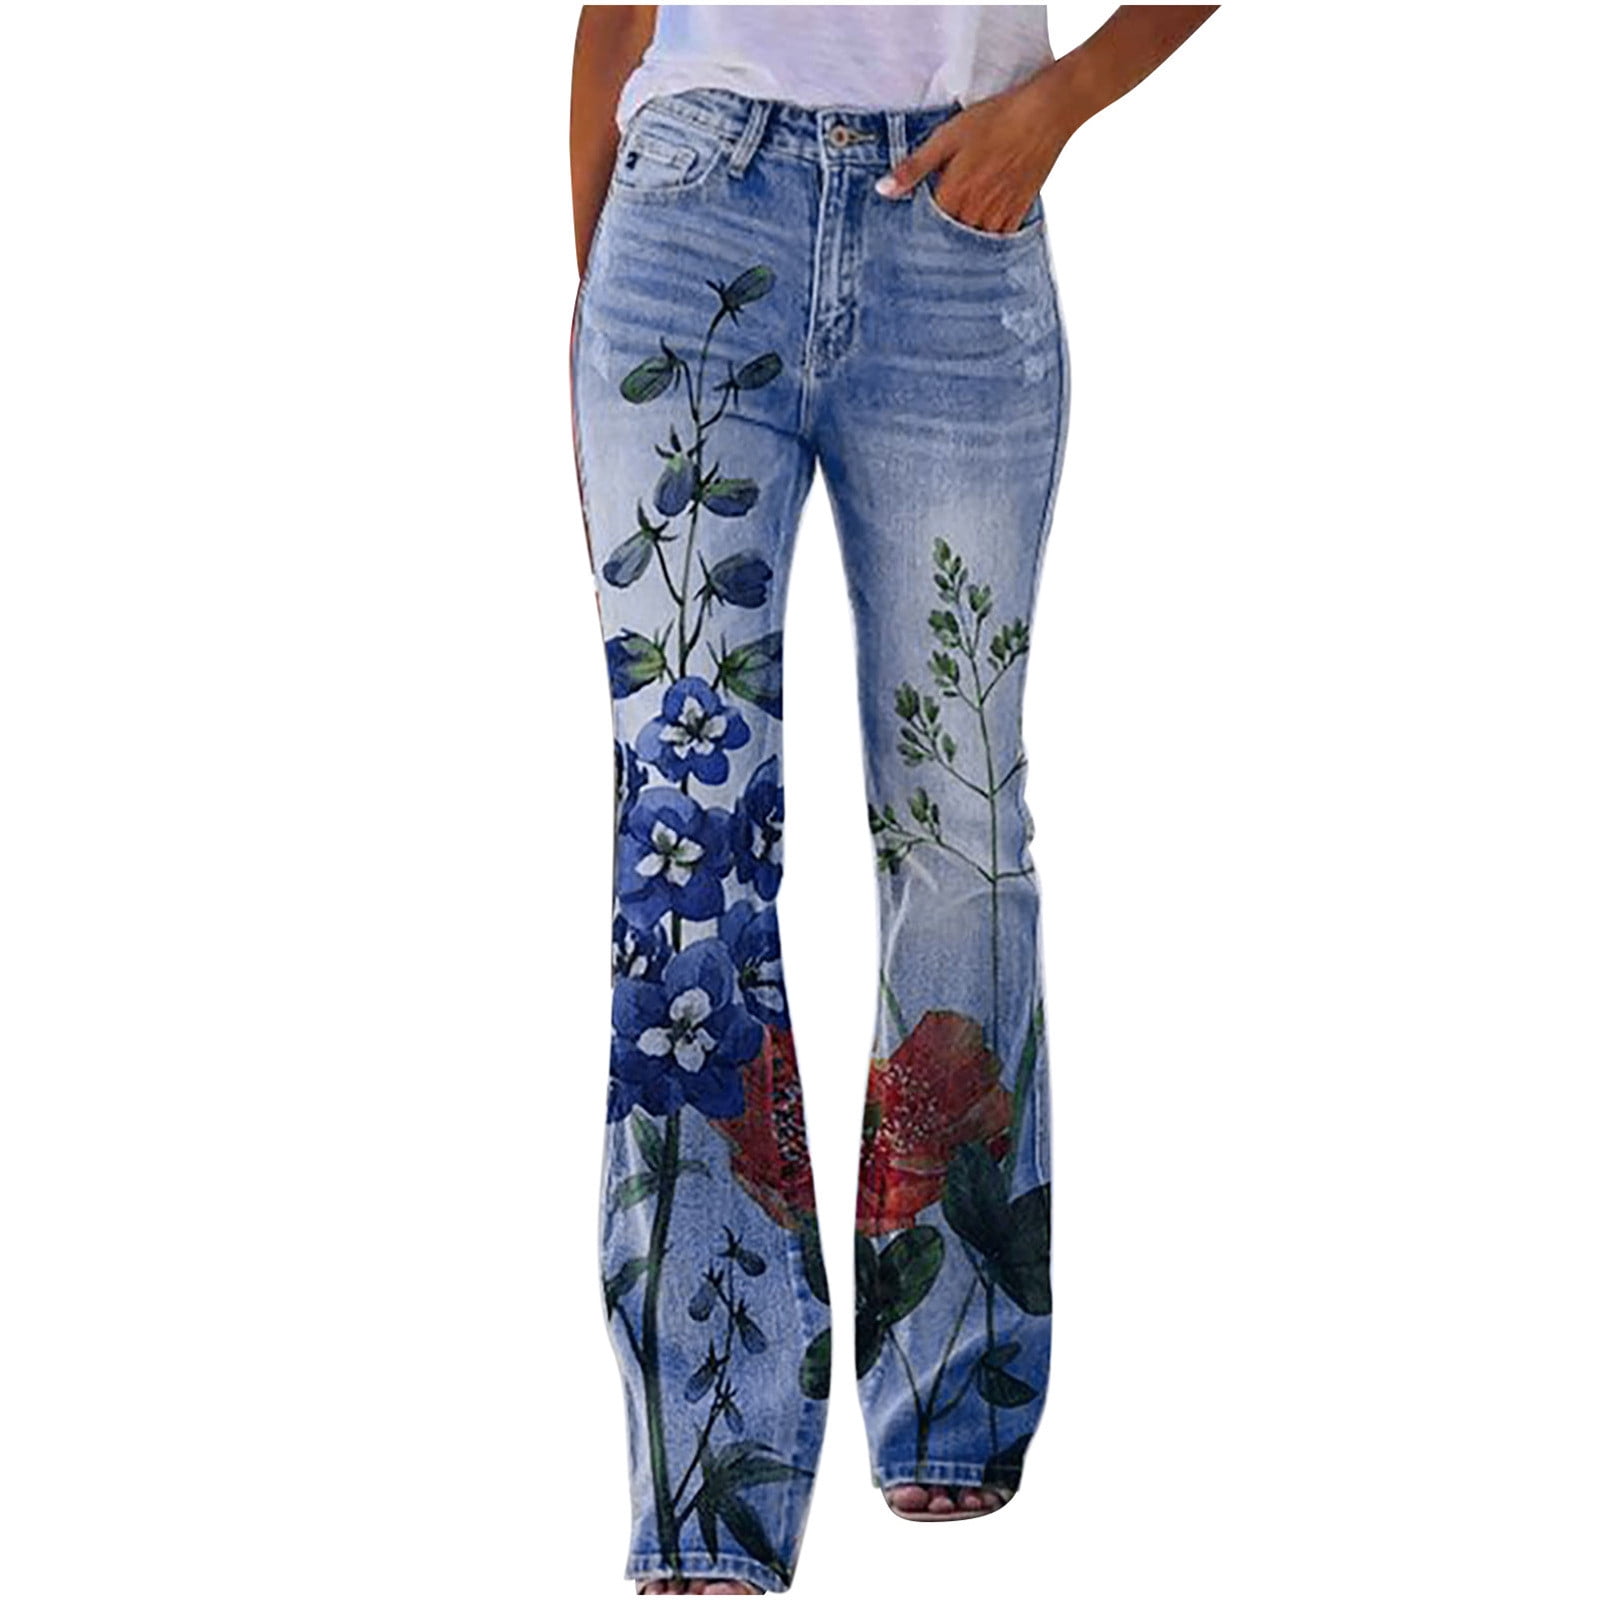 Womens Bootcut Jeans Women Mid Waisted Denim Jeans Embroidery Stretch  Button Straight Pants Jeans Ladies Embroidered Washed Slim Jeans 